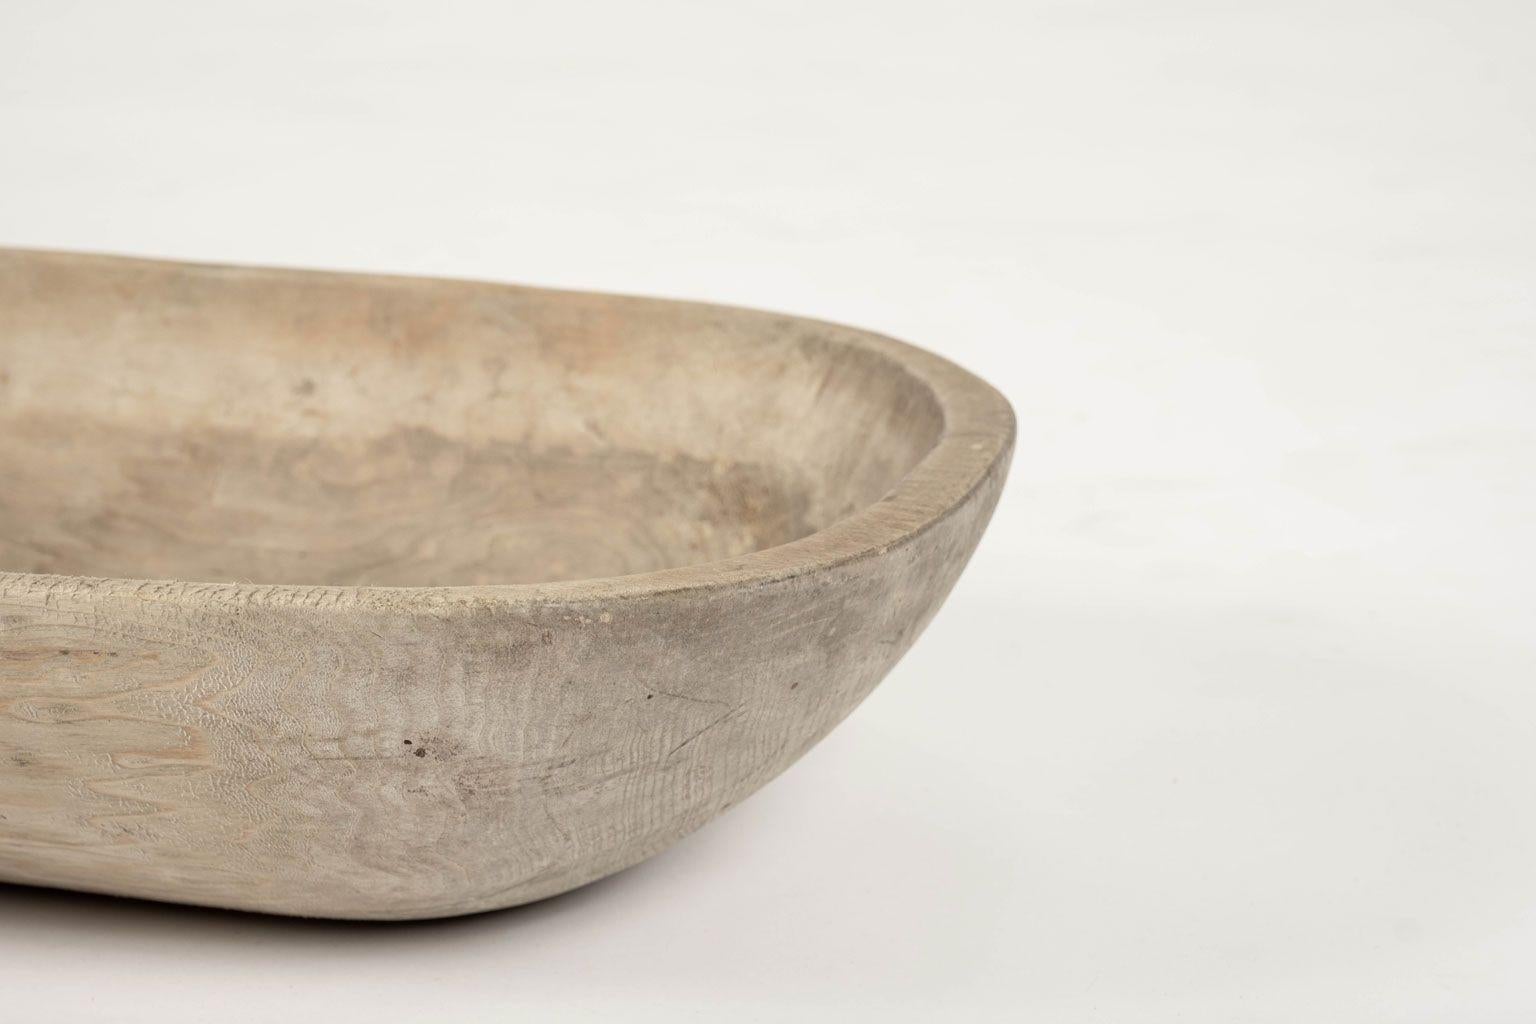 Trencher-Shaped Rustic Swedish Dug Out Bowl For Sale 1